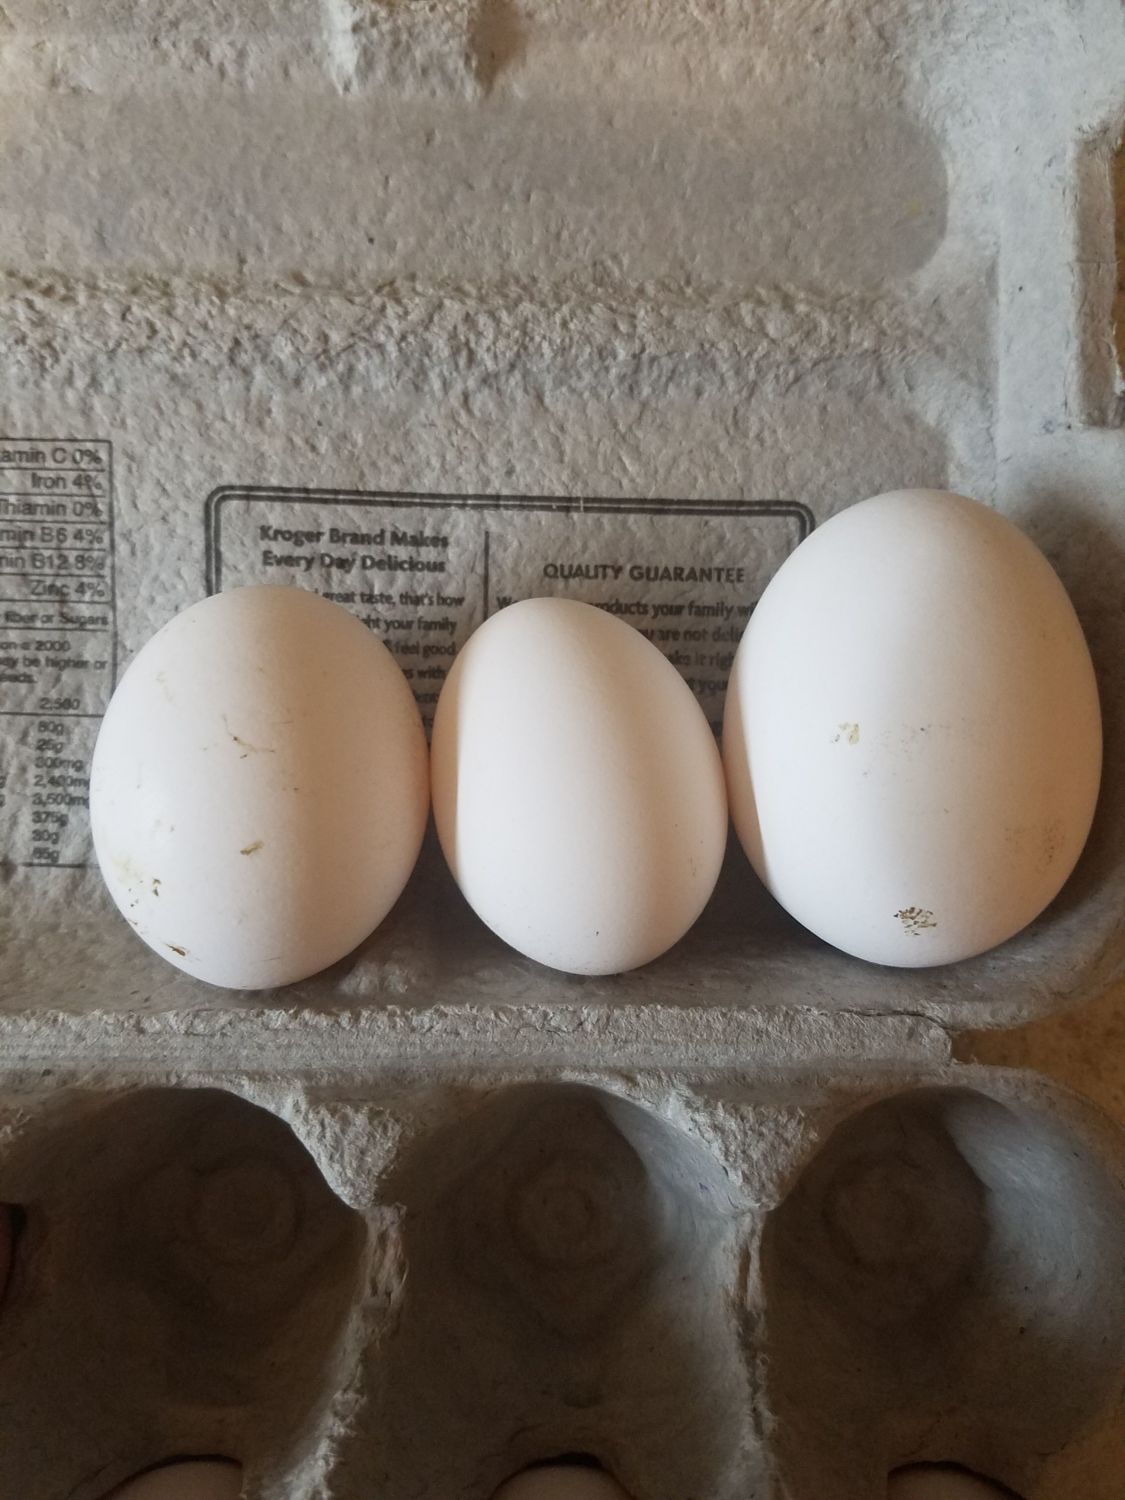 jersey giant chicken egg size